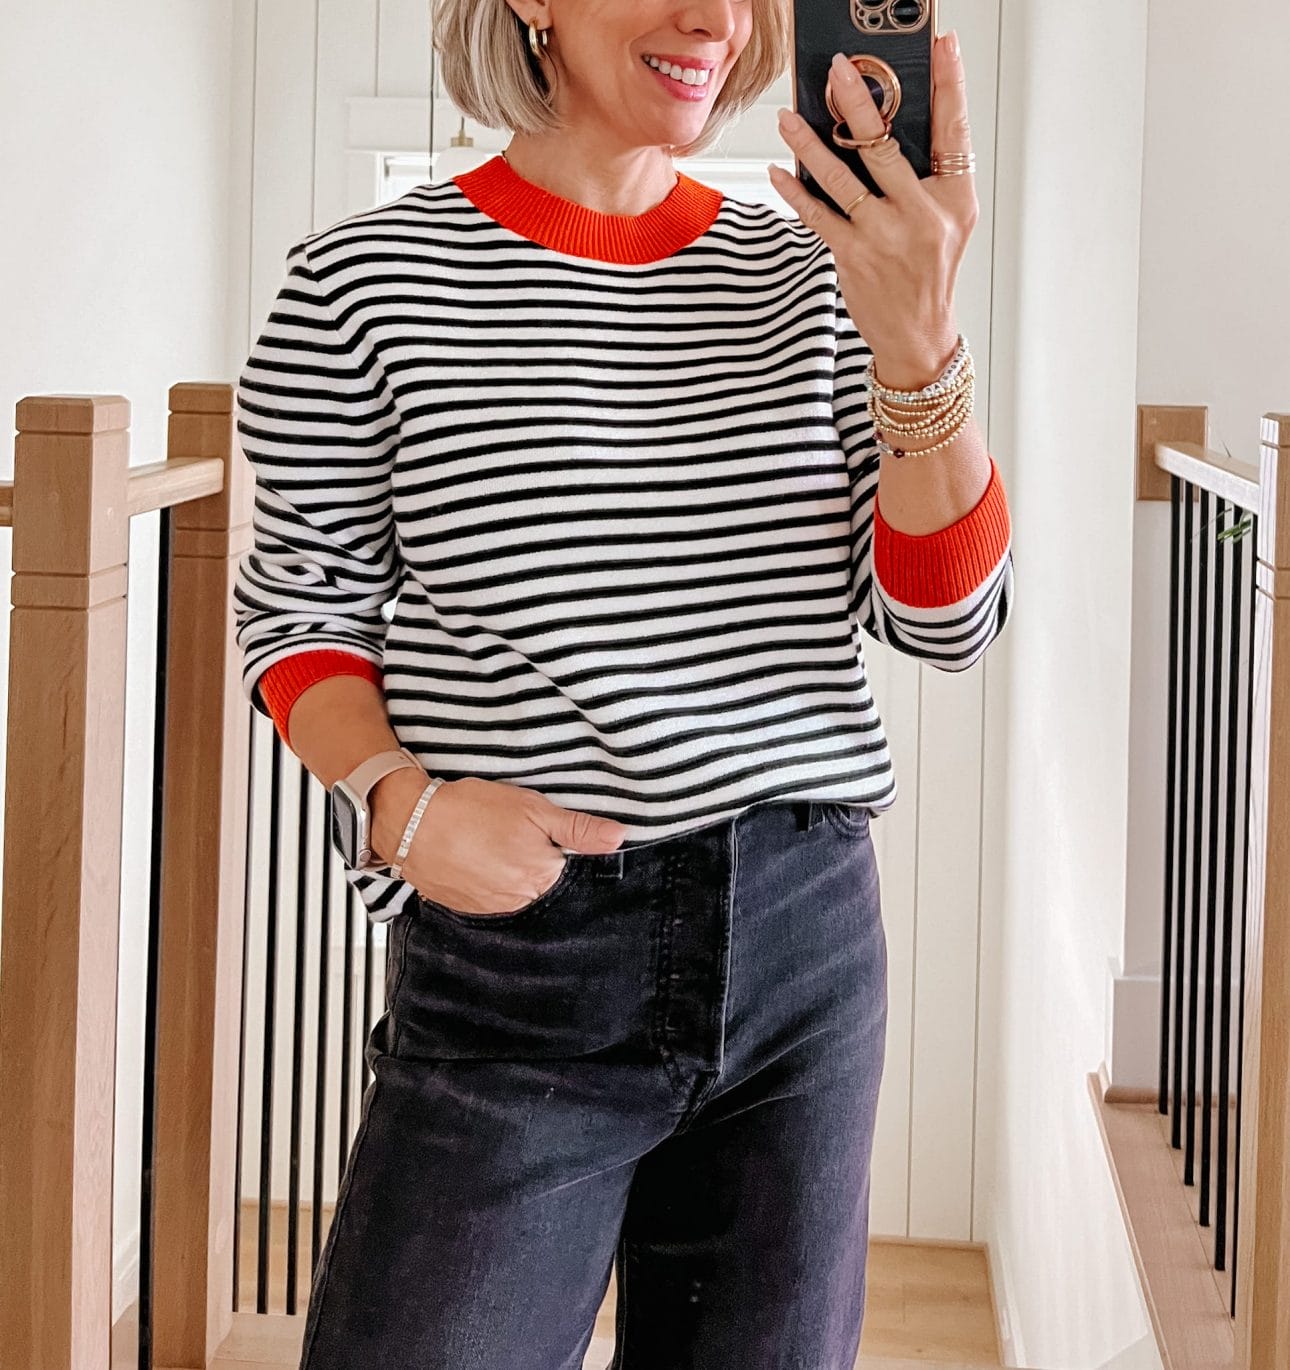 Orange Trim Black and White Striped Sweater, Jeans, Booties 